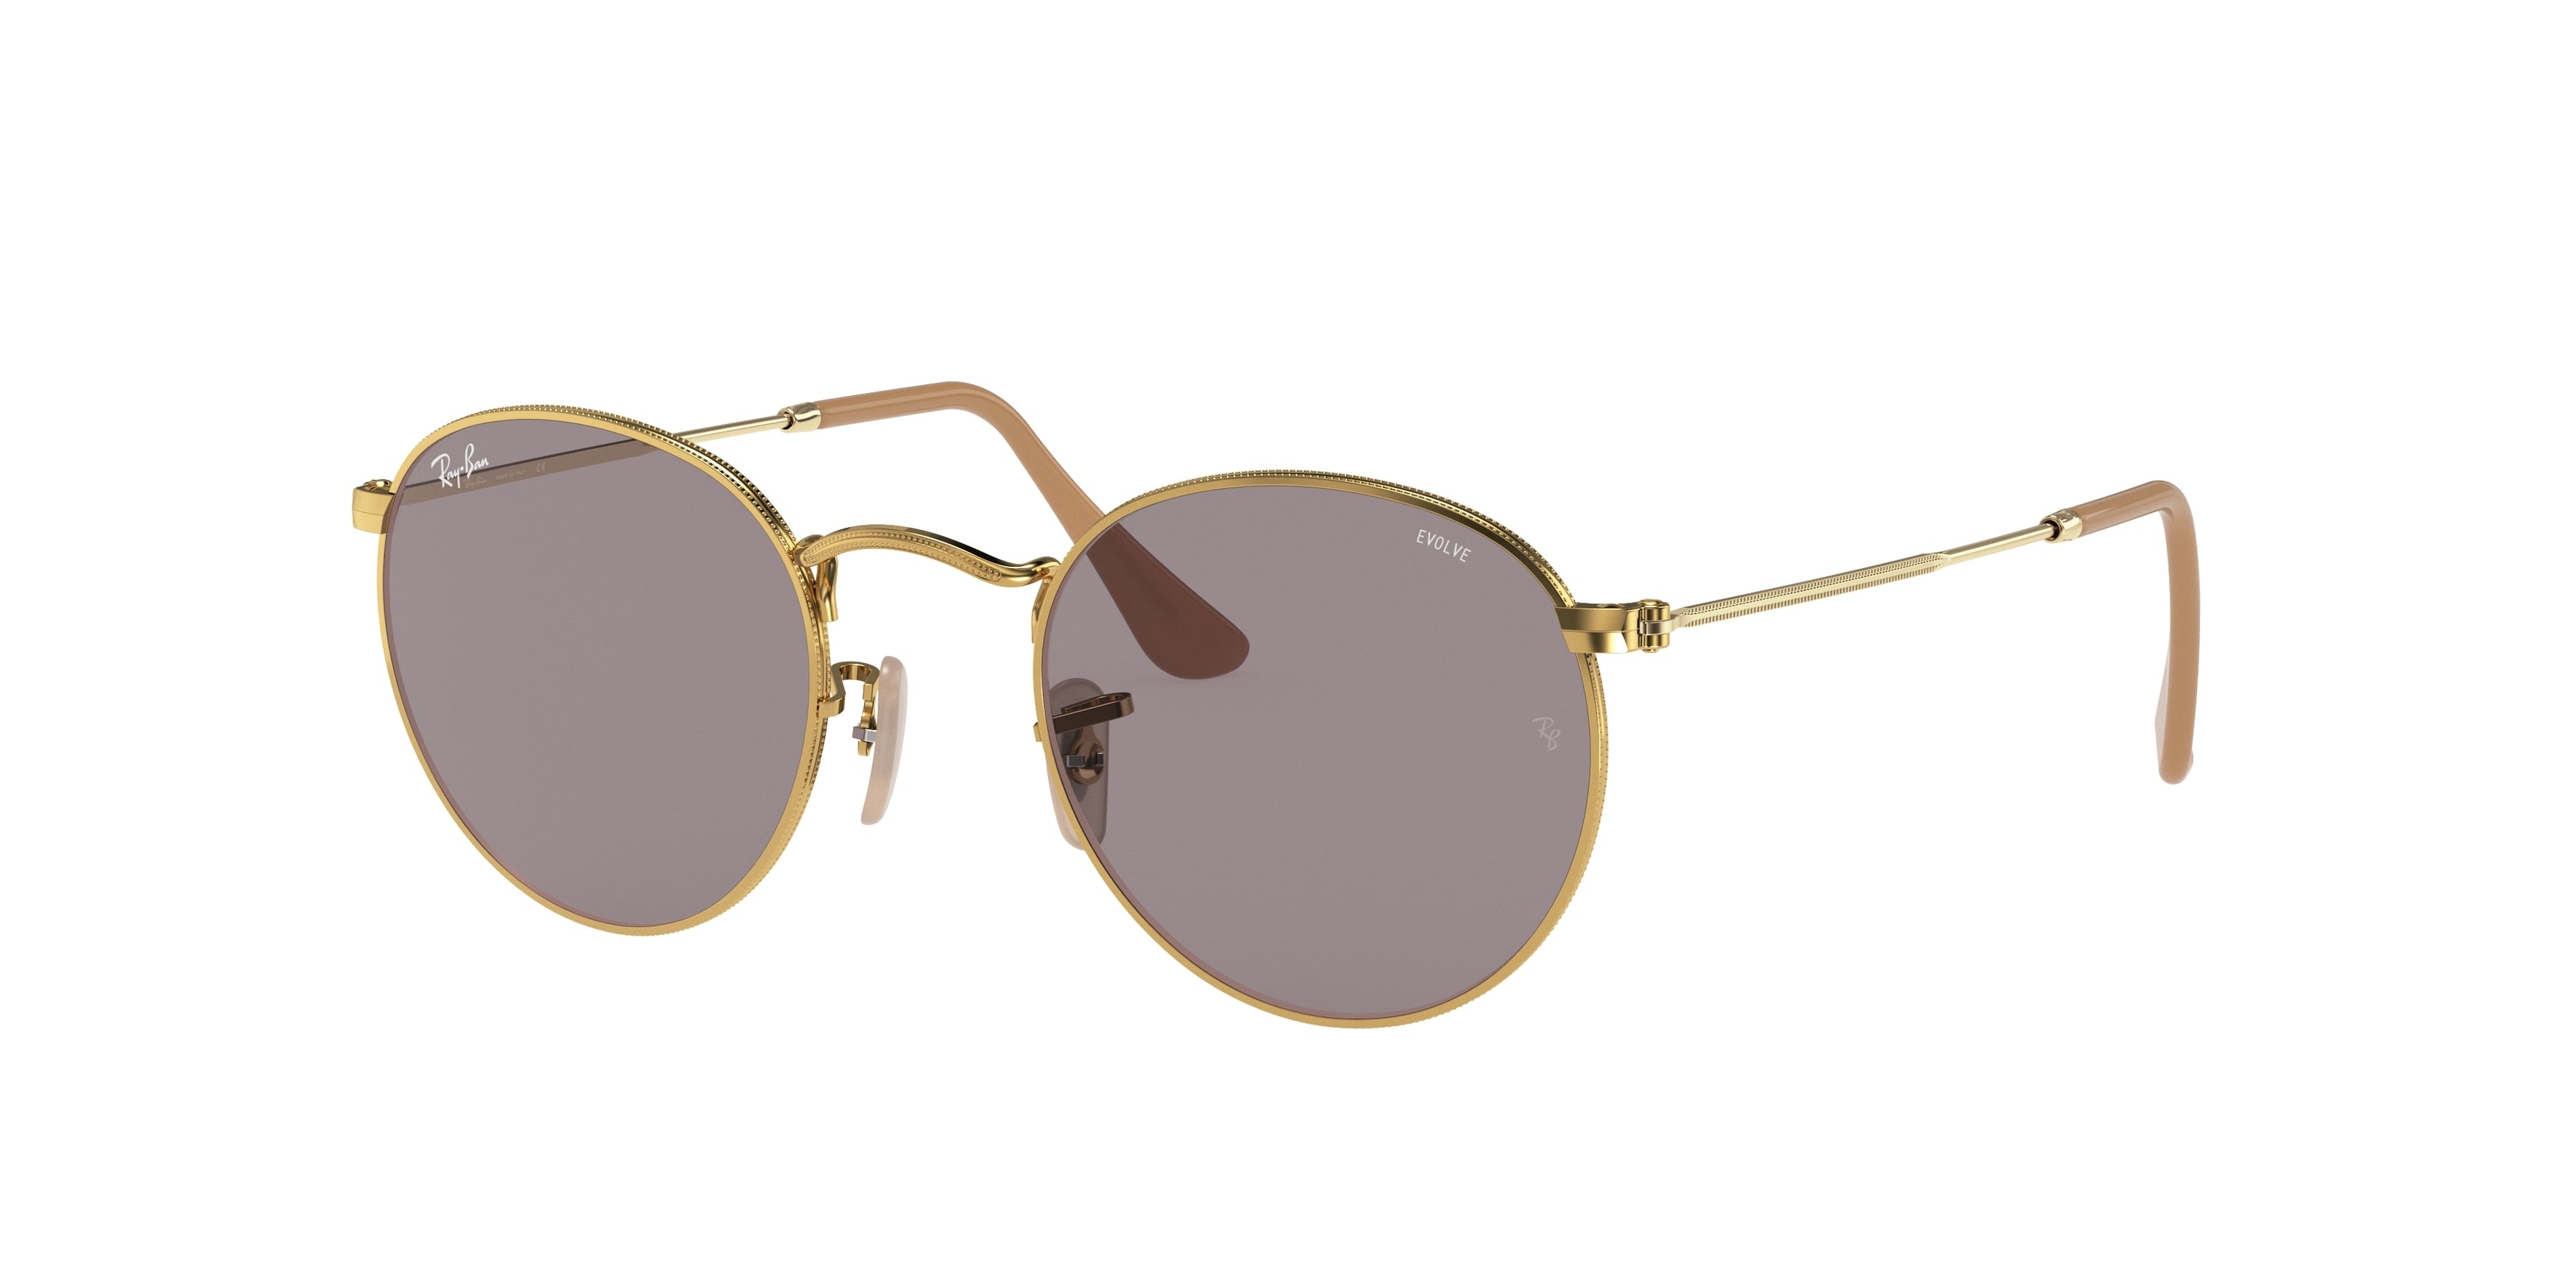 Ray-Ban ROUND METAL RB3447 Round Sunglasses  9064V8-Gold 52-145-21 - Color Map Gold